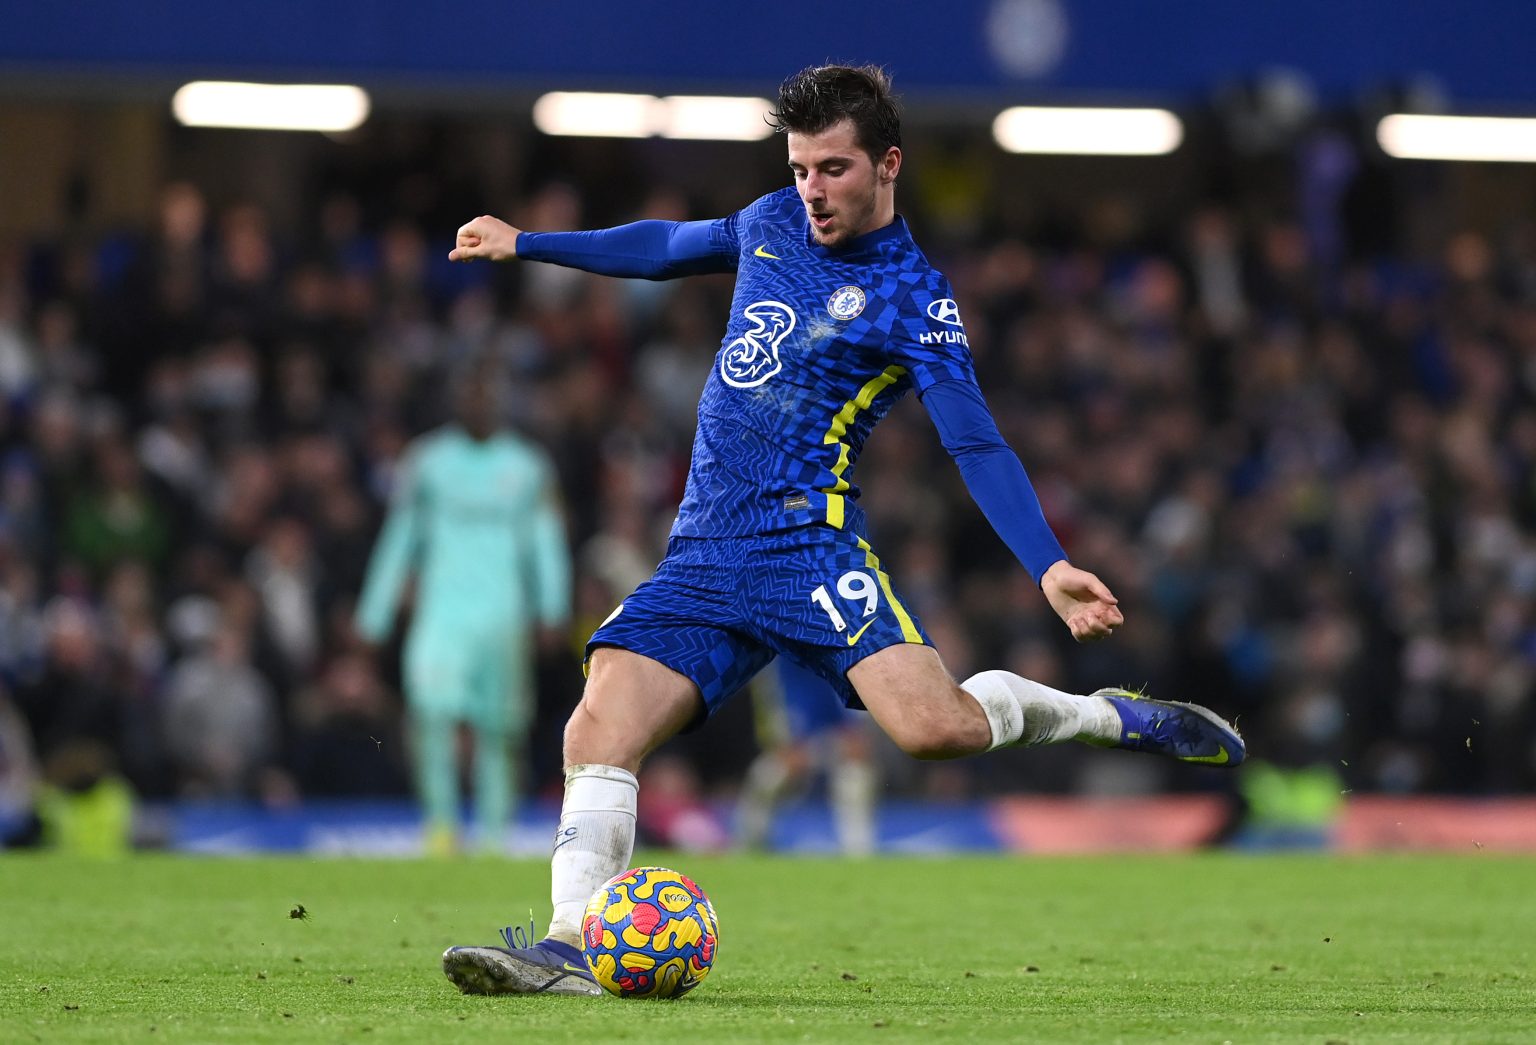  Chelsea suffer major blow as Mason Mount is forced off with a bad ankle ligament injury - Bóng Đá